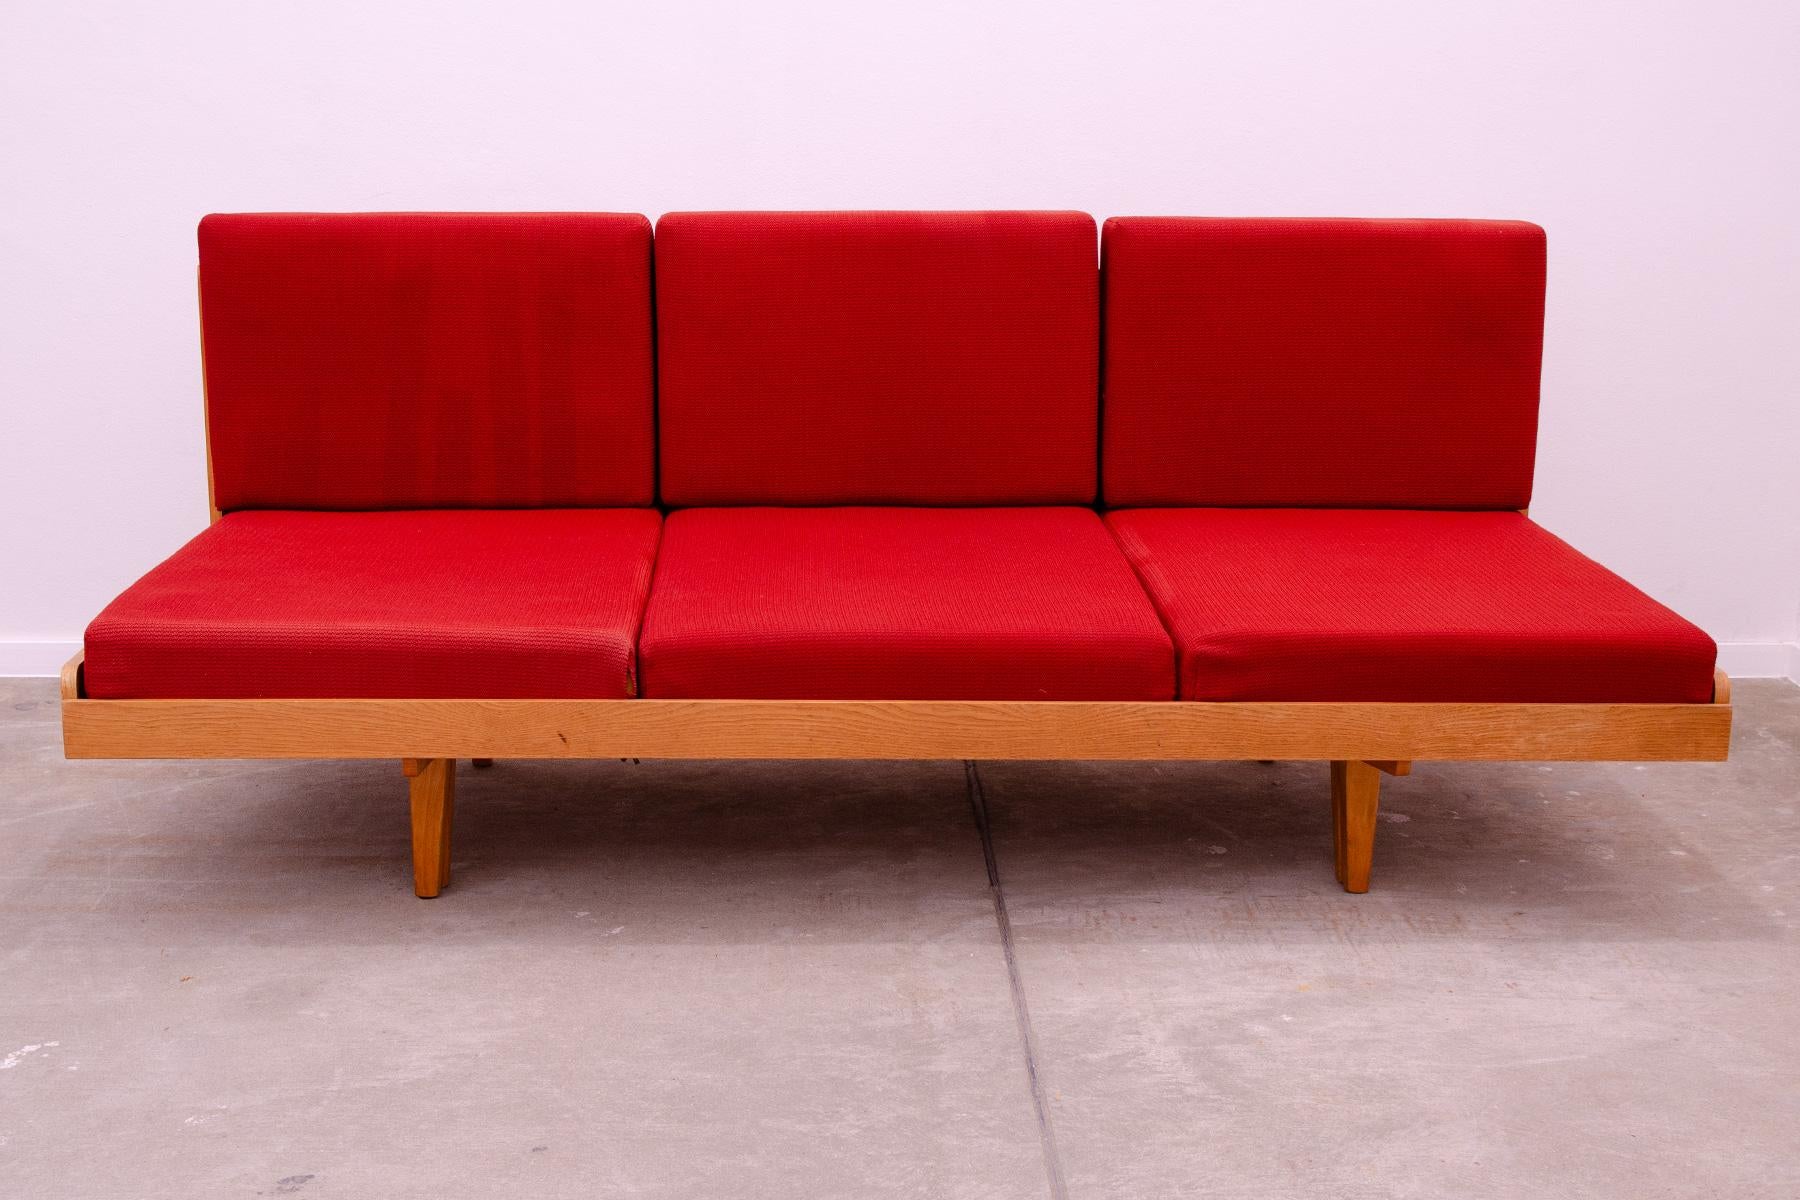 Midcentury sofa bed, made by Jitona company in the former Czechoslovakia in the 1970s. The sofa is made of beech wood and ash wood and has an original upholstery. The sofa is in a very well-preserved and good condition, however, it bears reasonable